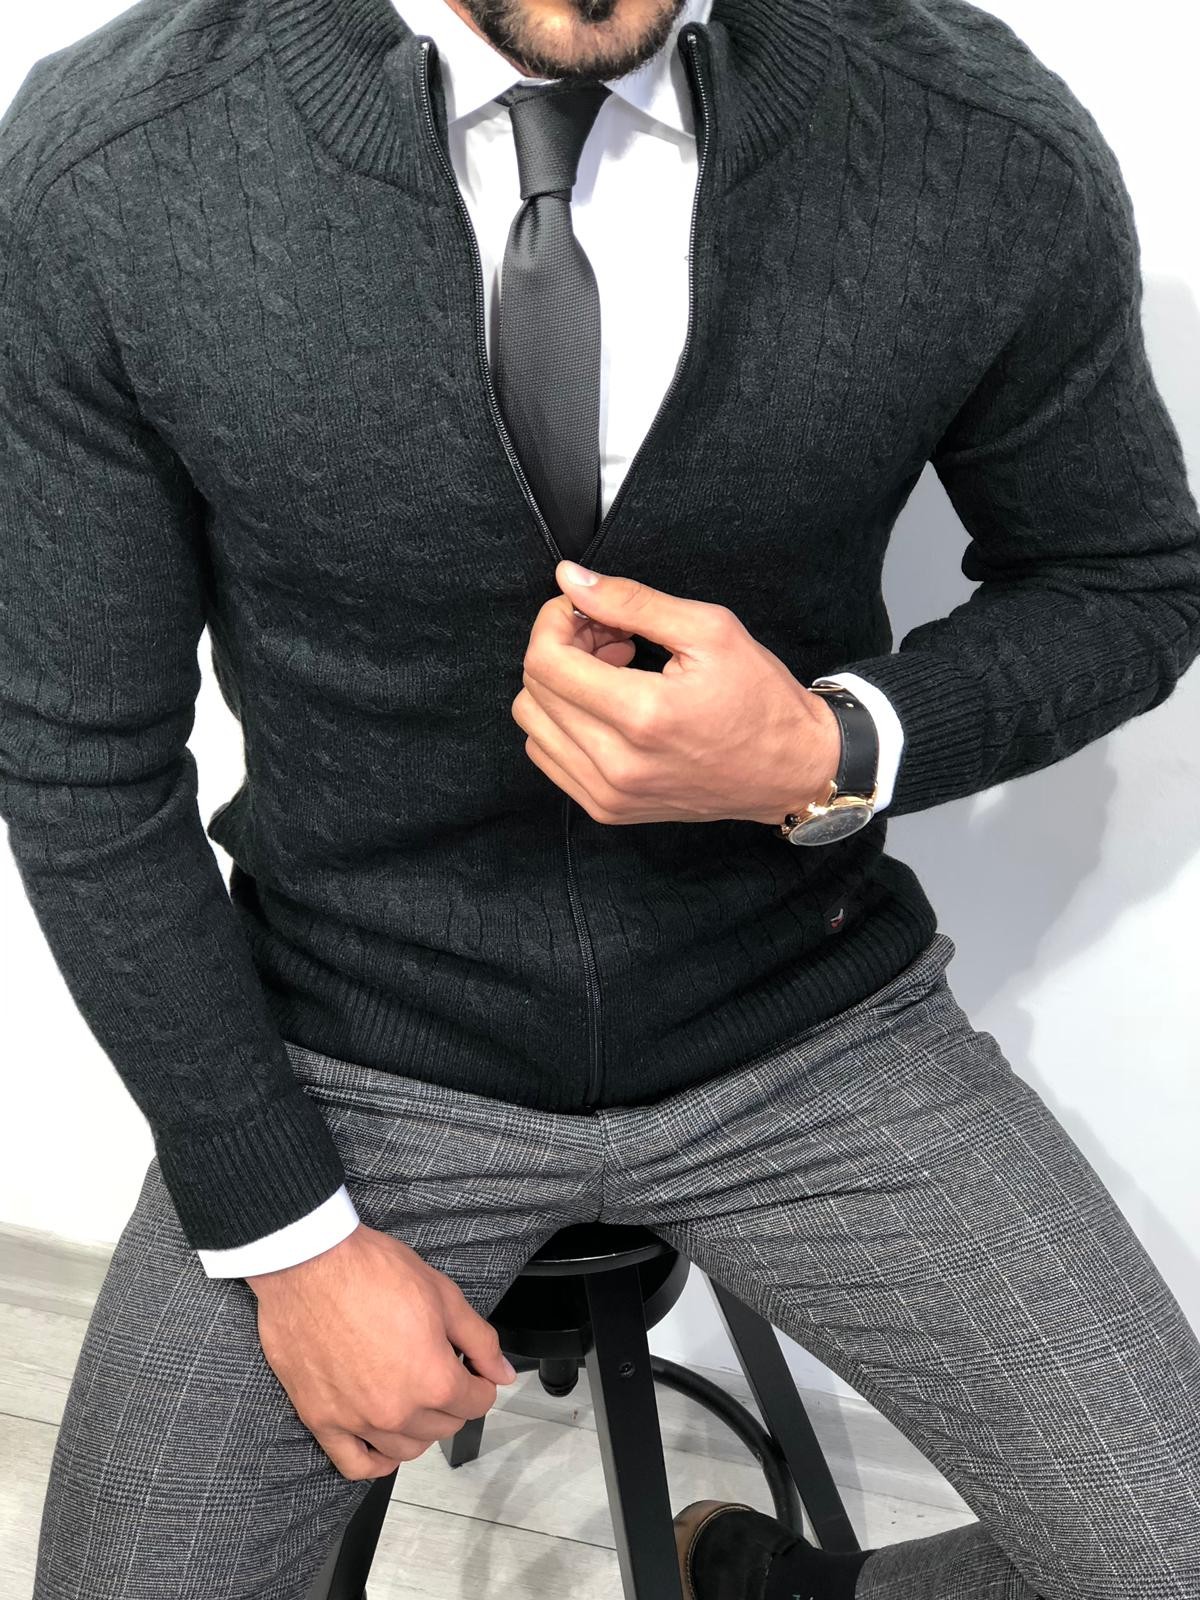 Buy Black Slim Fit Cardigan by Gentwith.com with Free Shipping